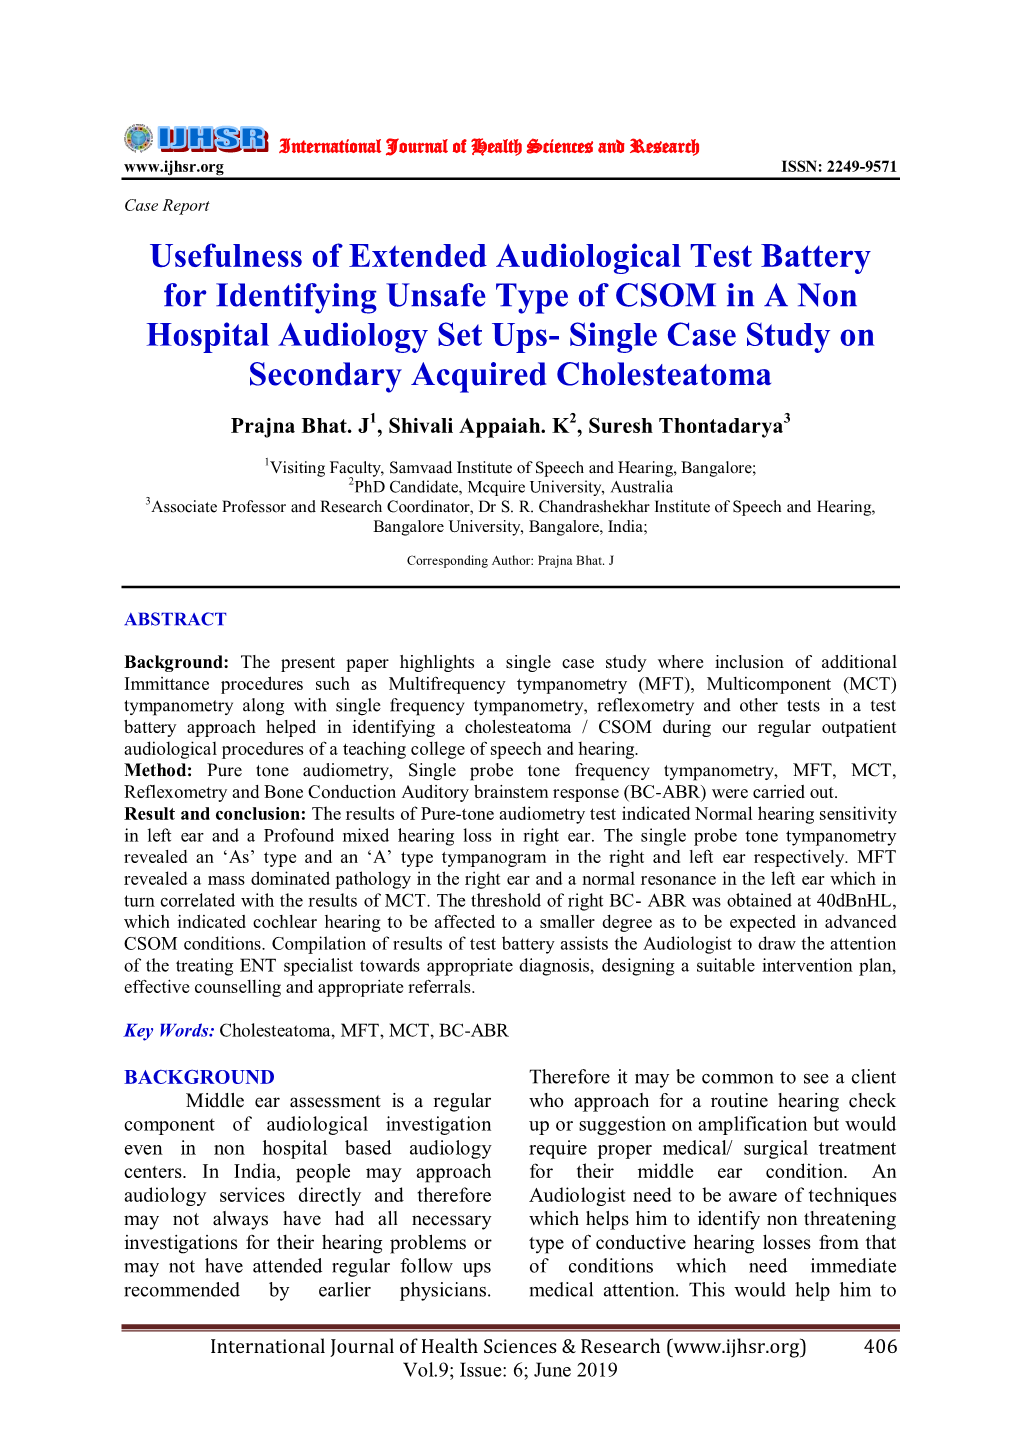 Usefulness of Extended Audiological Test Battery for Identifying Unsafe